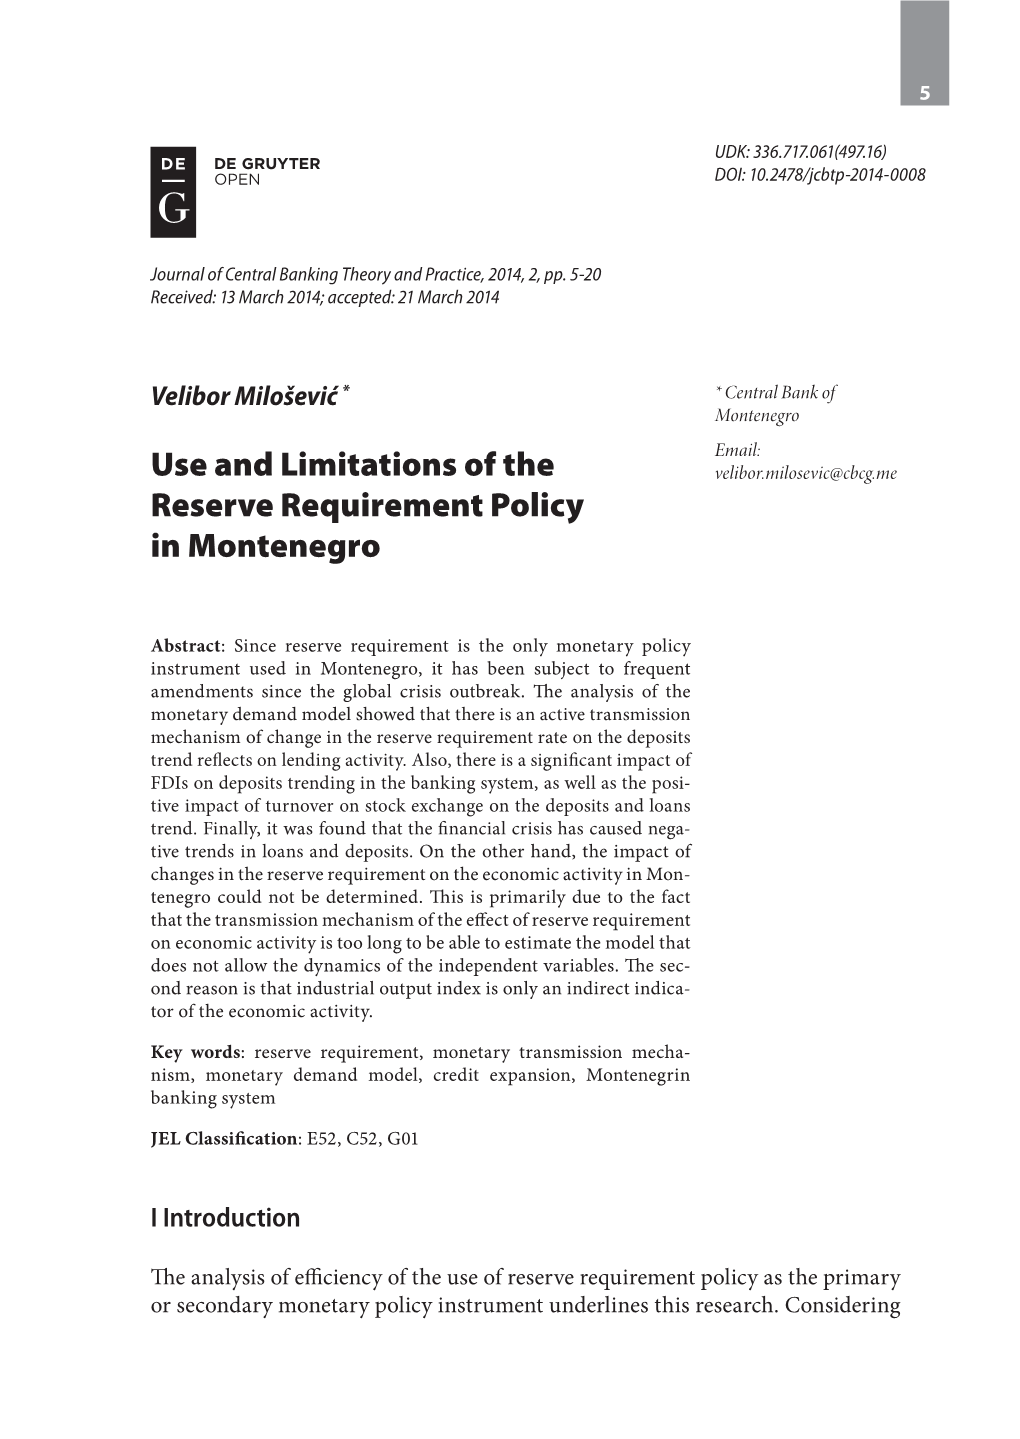 Use and Limitations of the Reserve Requirement Policy in Montenegro 7